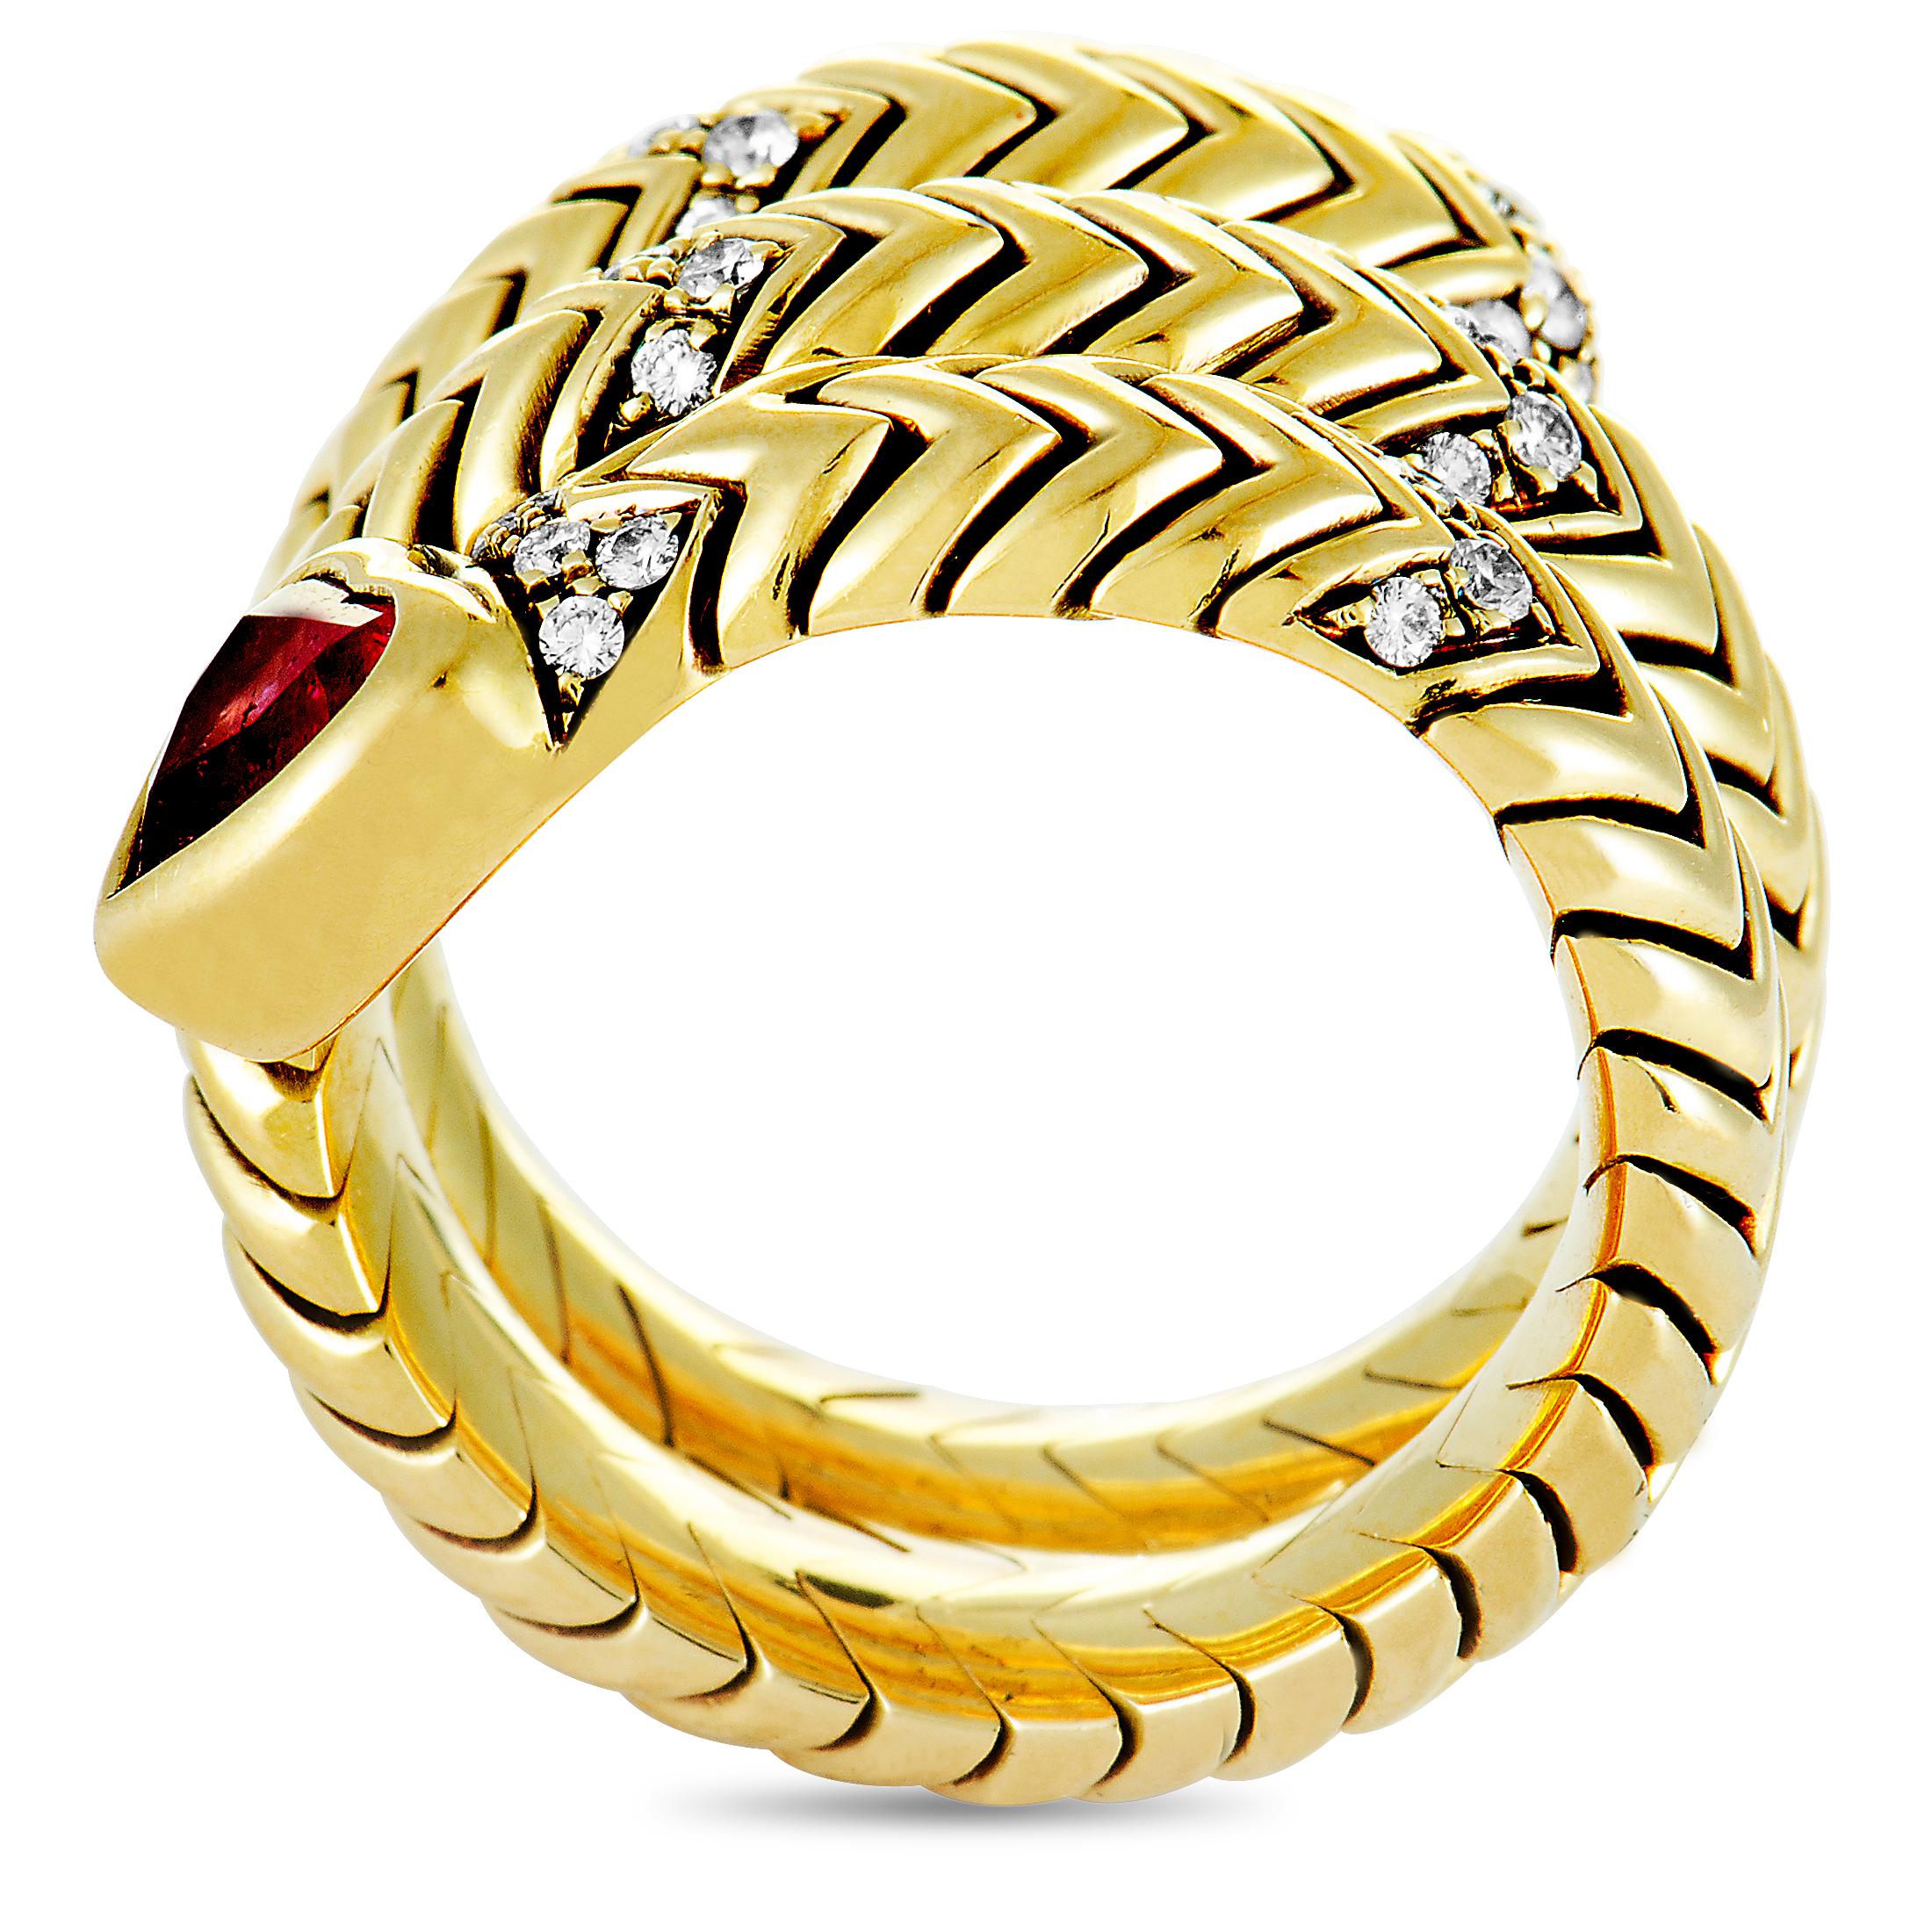 The Bvlgari “Serpenti” ring is made of 18K yellow gold and set with diamonds and a ruby. It weighs 22.9 grams, boasting band thickness of 10 mm and top height of 4 mm, while top dimensions measure 18 by 20 mm.

This item is offered in estate